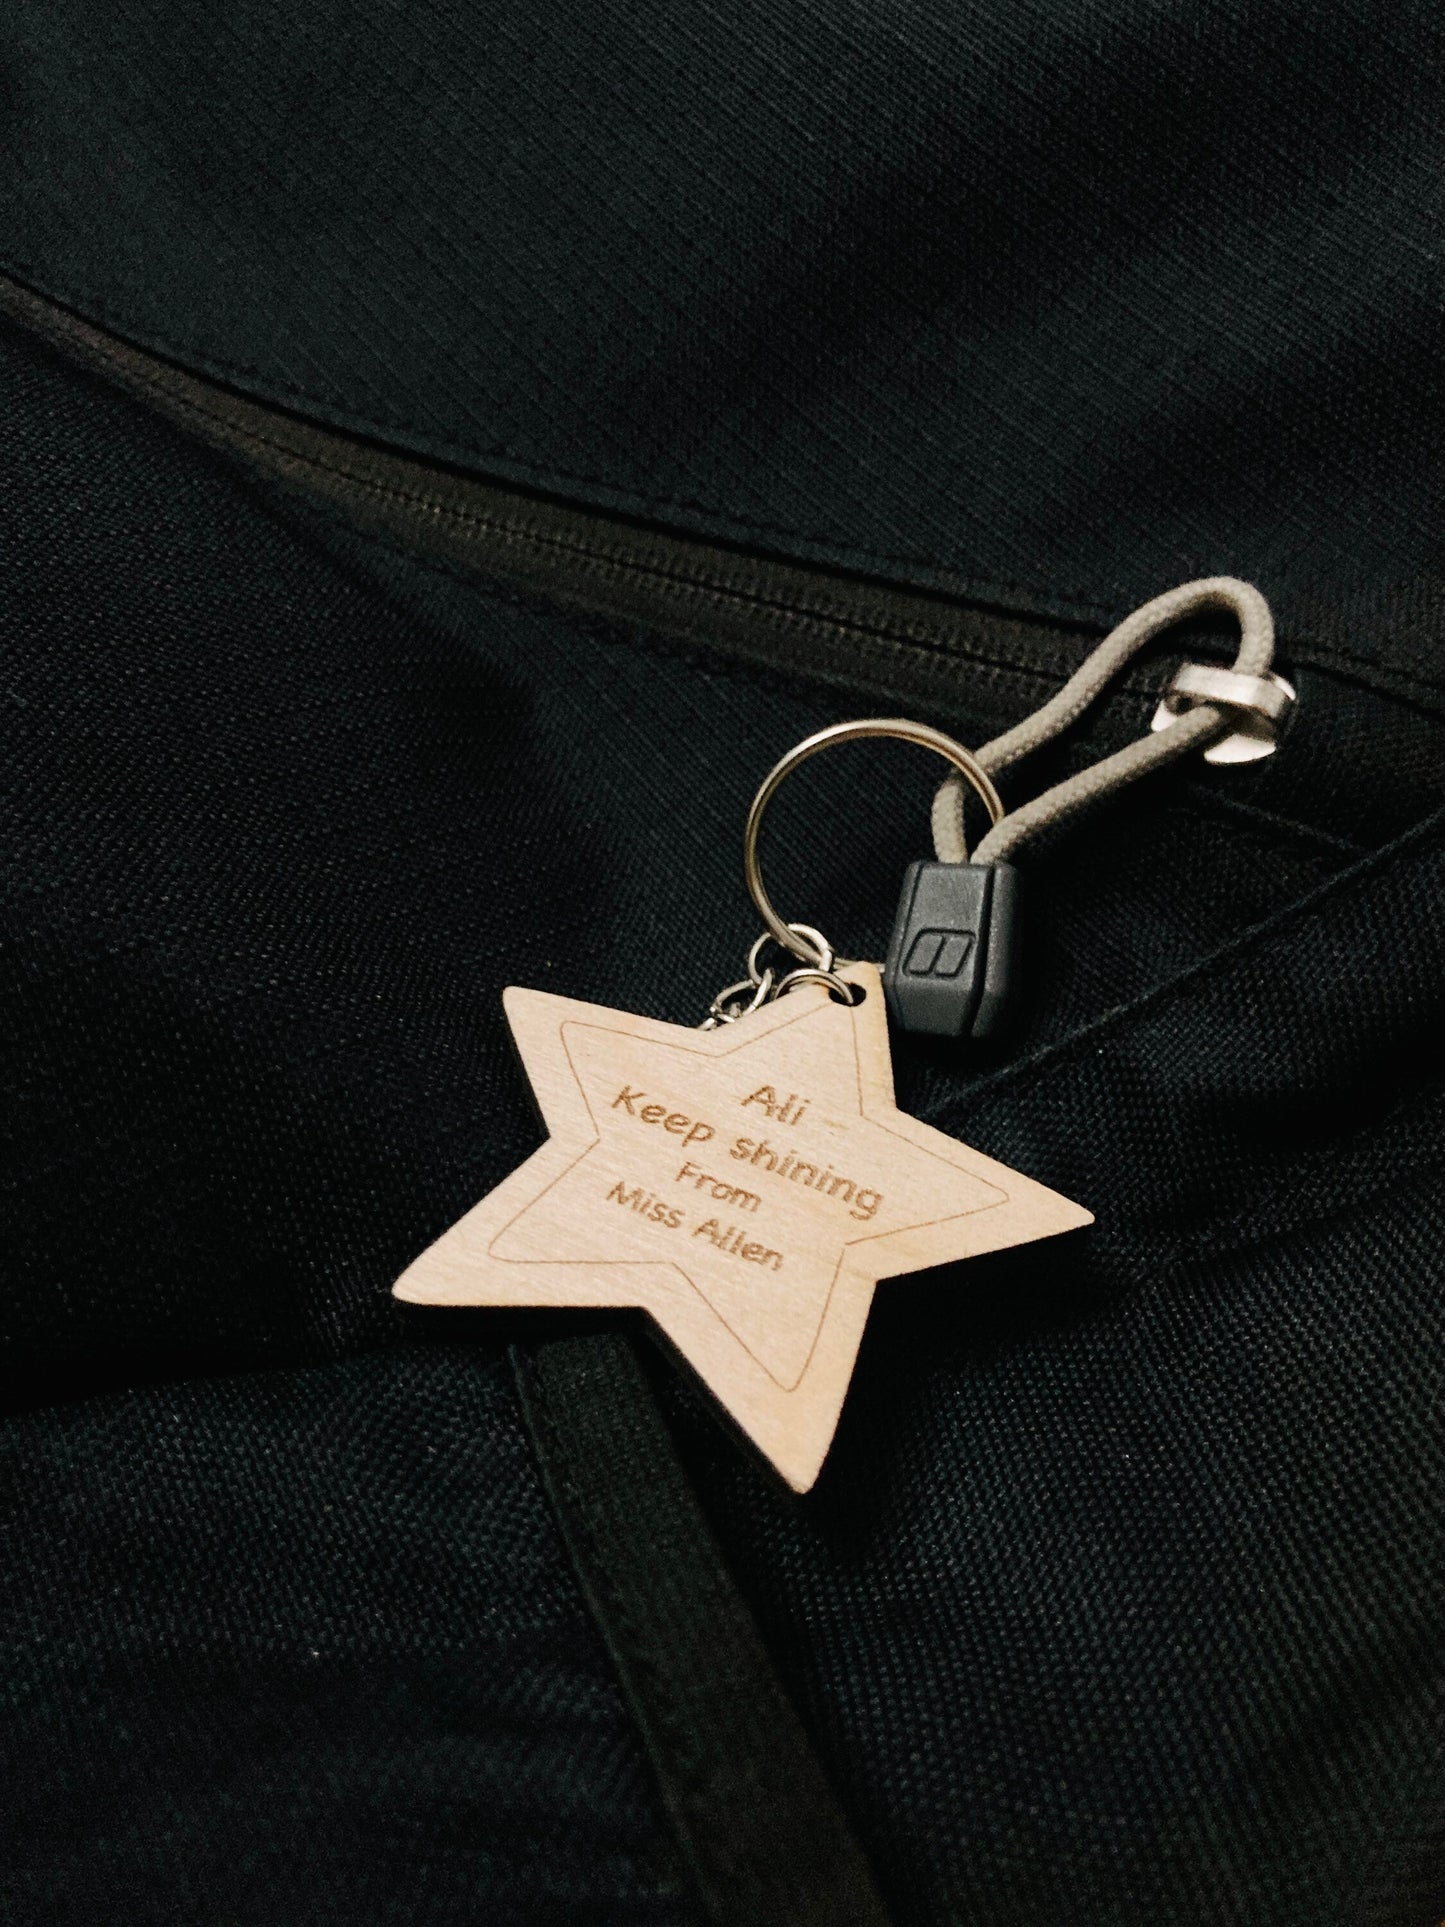 School Children Gifts, Personalised Keyrings For Pupils, Gifts From Teacher